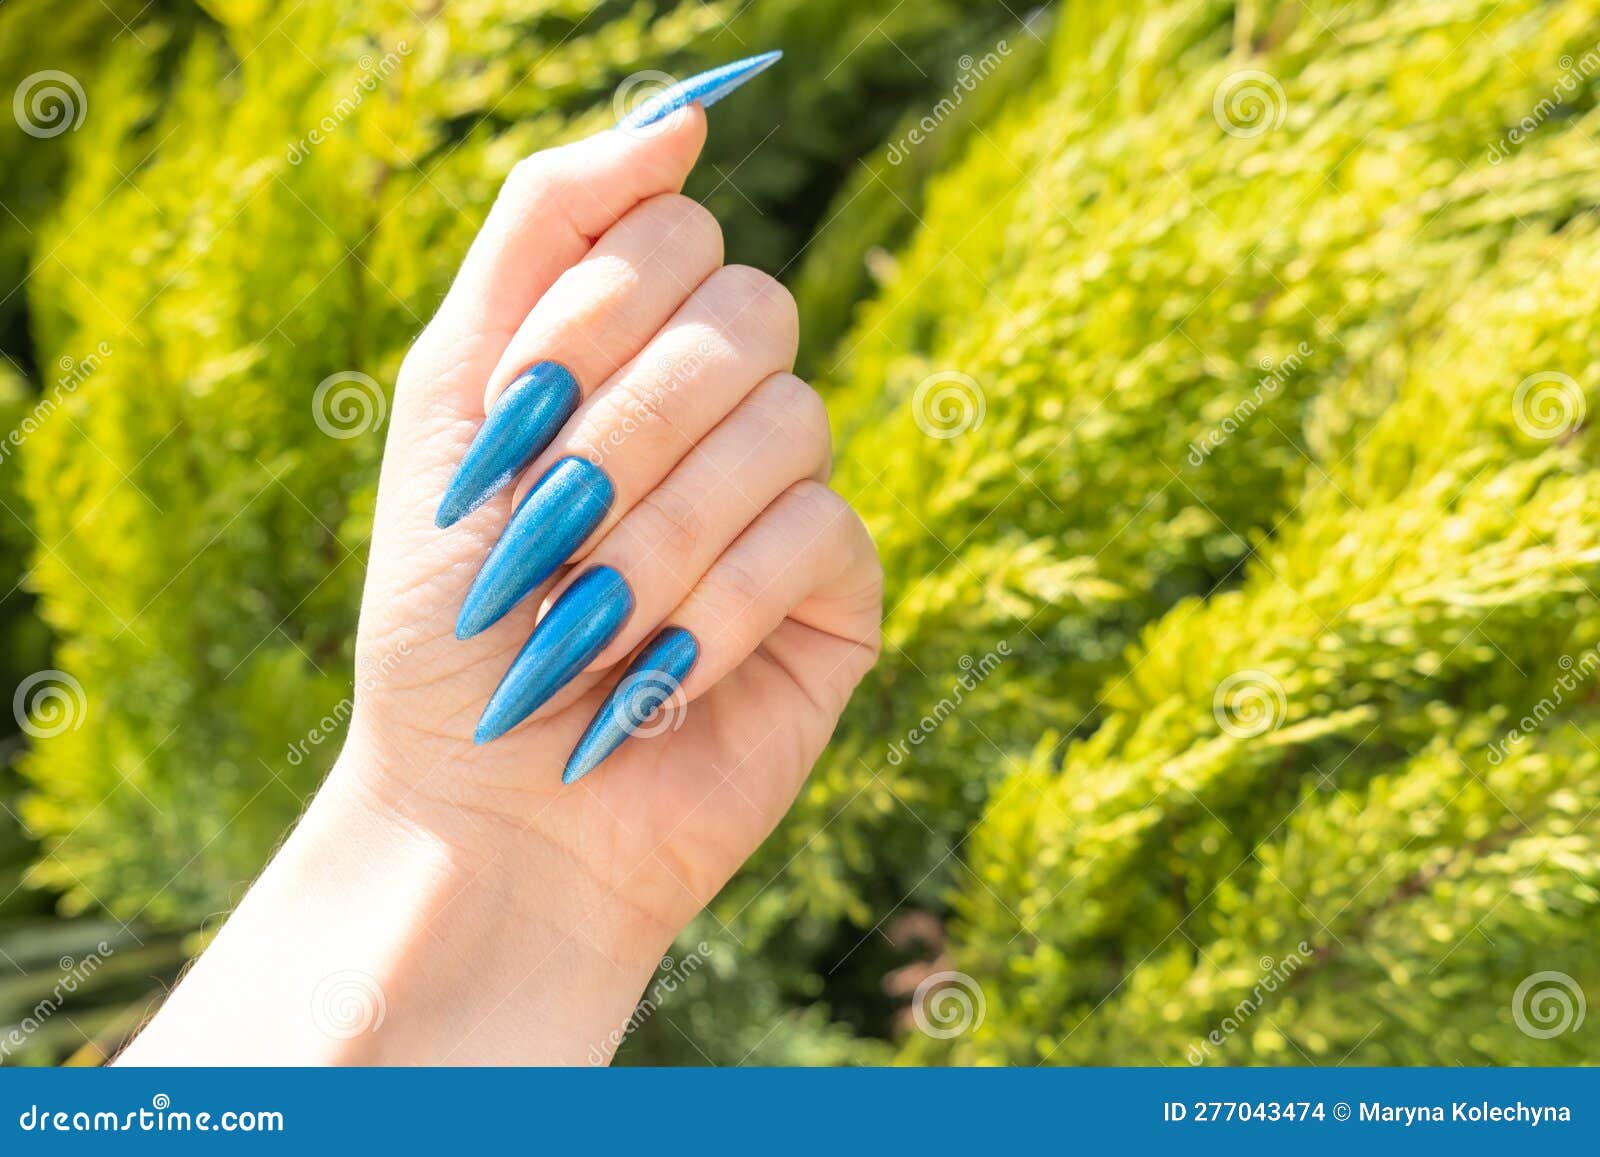 Blue nail polish and surgical team - wide 10